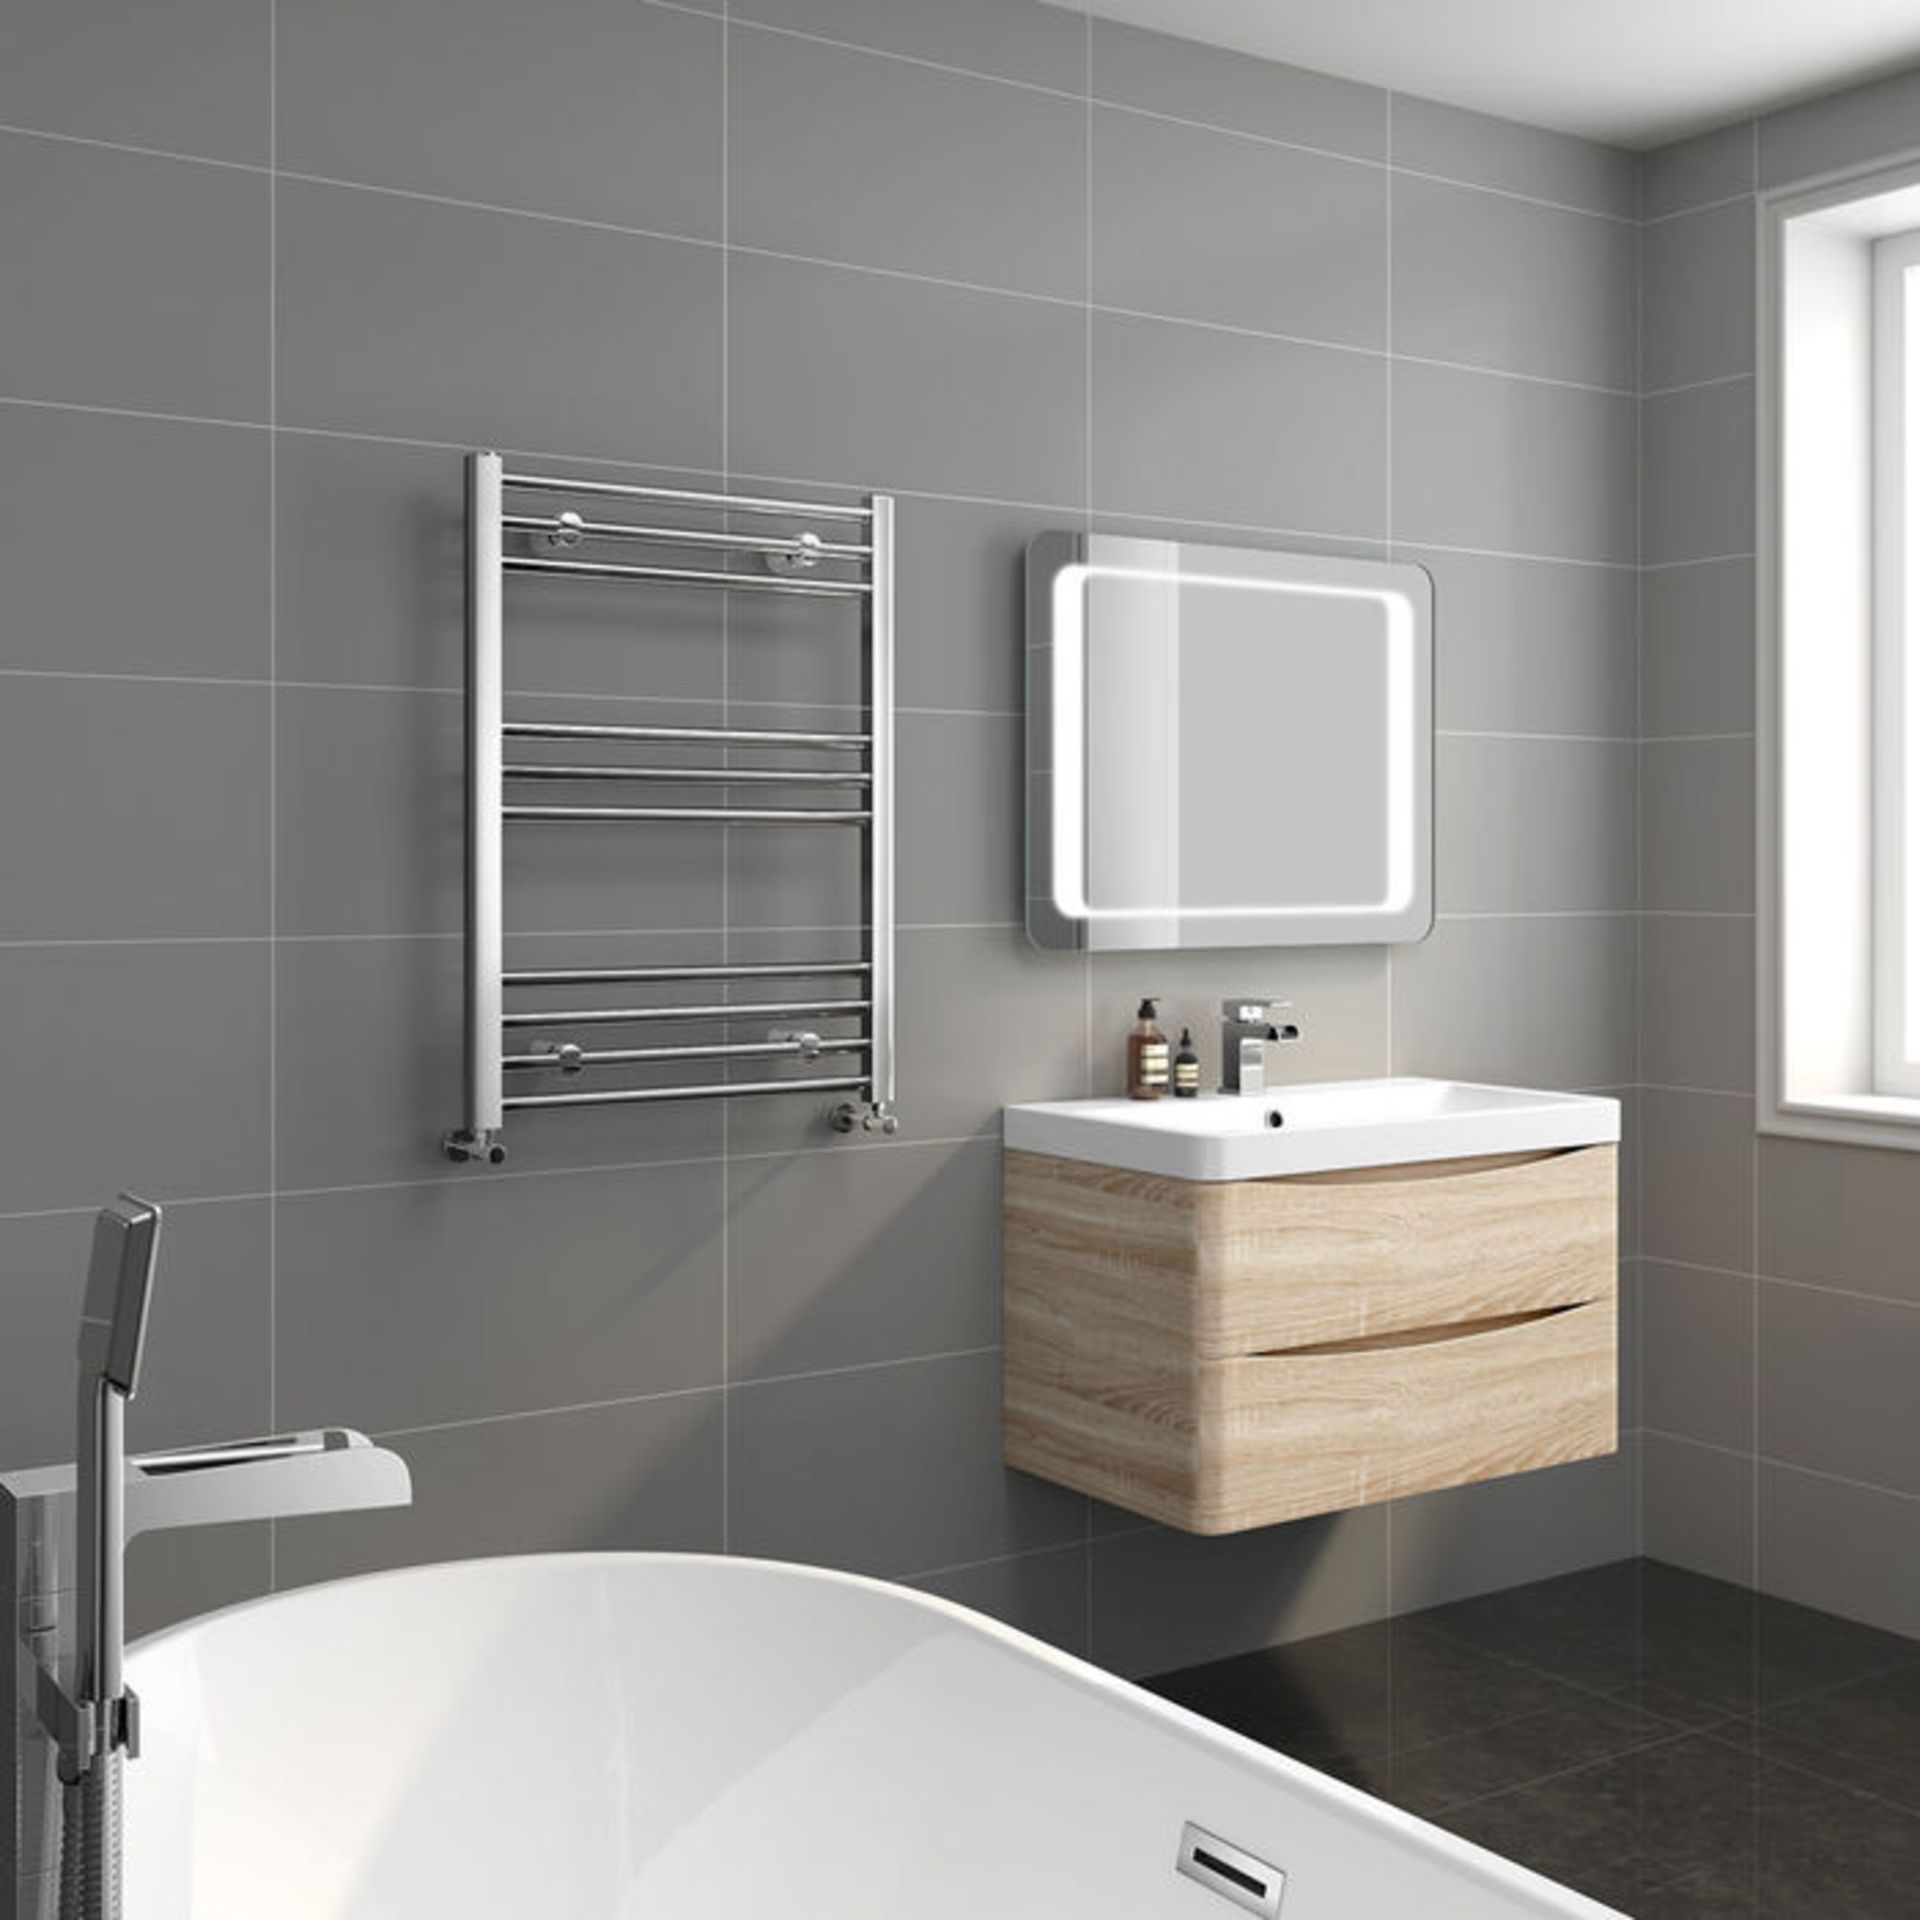 (XM80) 800x600mm - 20mm Tubes - Chrome Heated Straight Rail Ladder Towel Radiator. Low carbon - Image 2 of 4